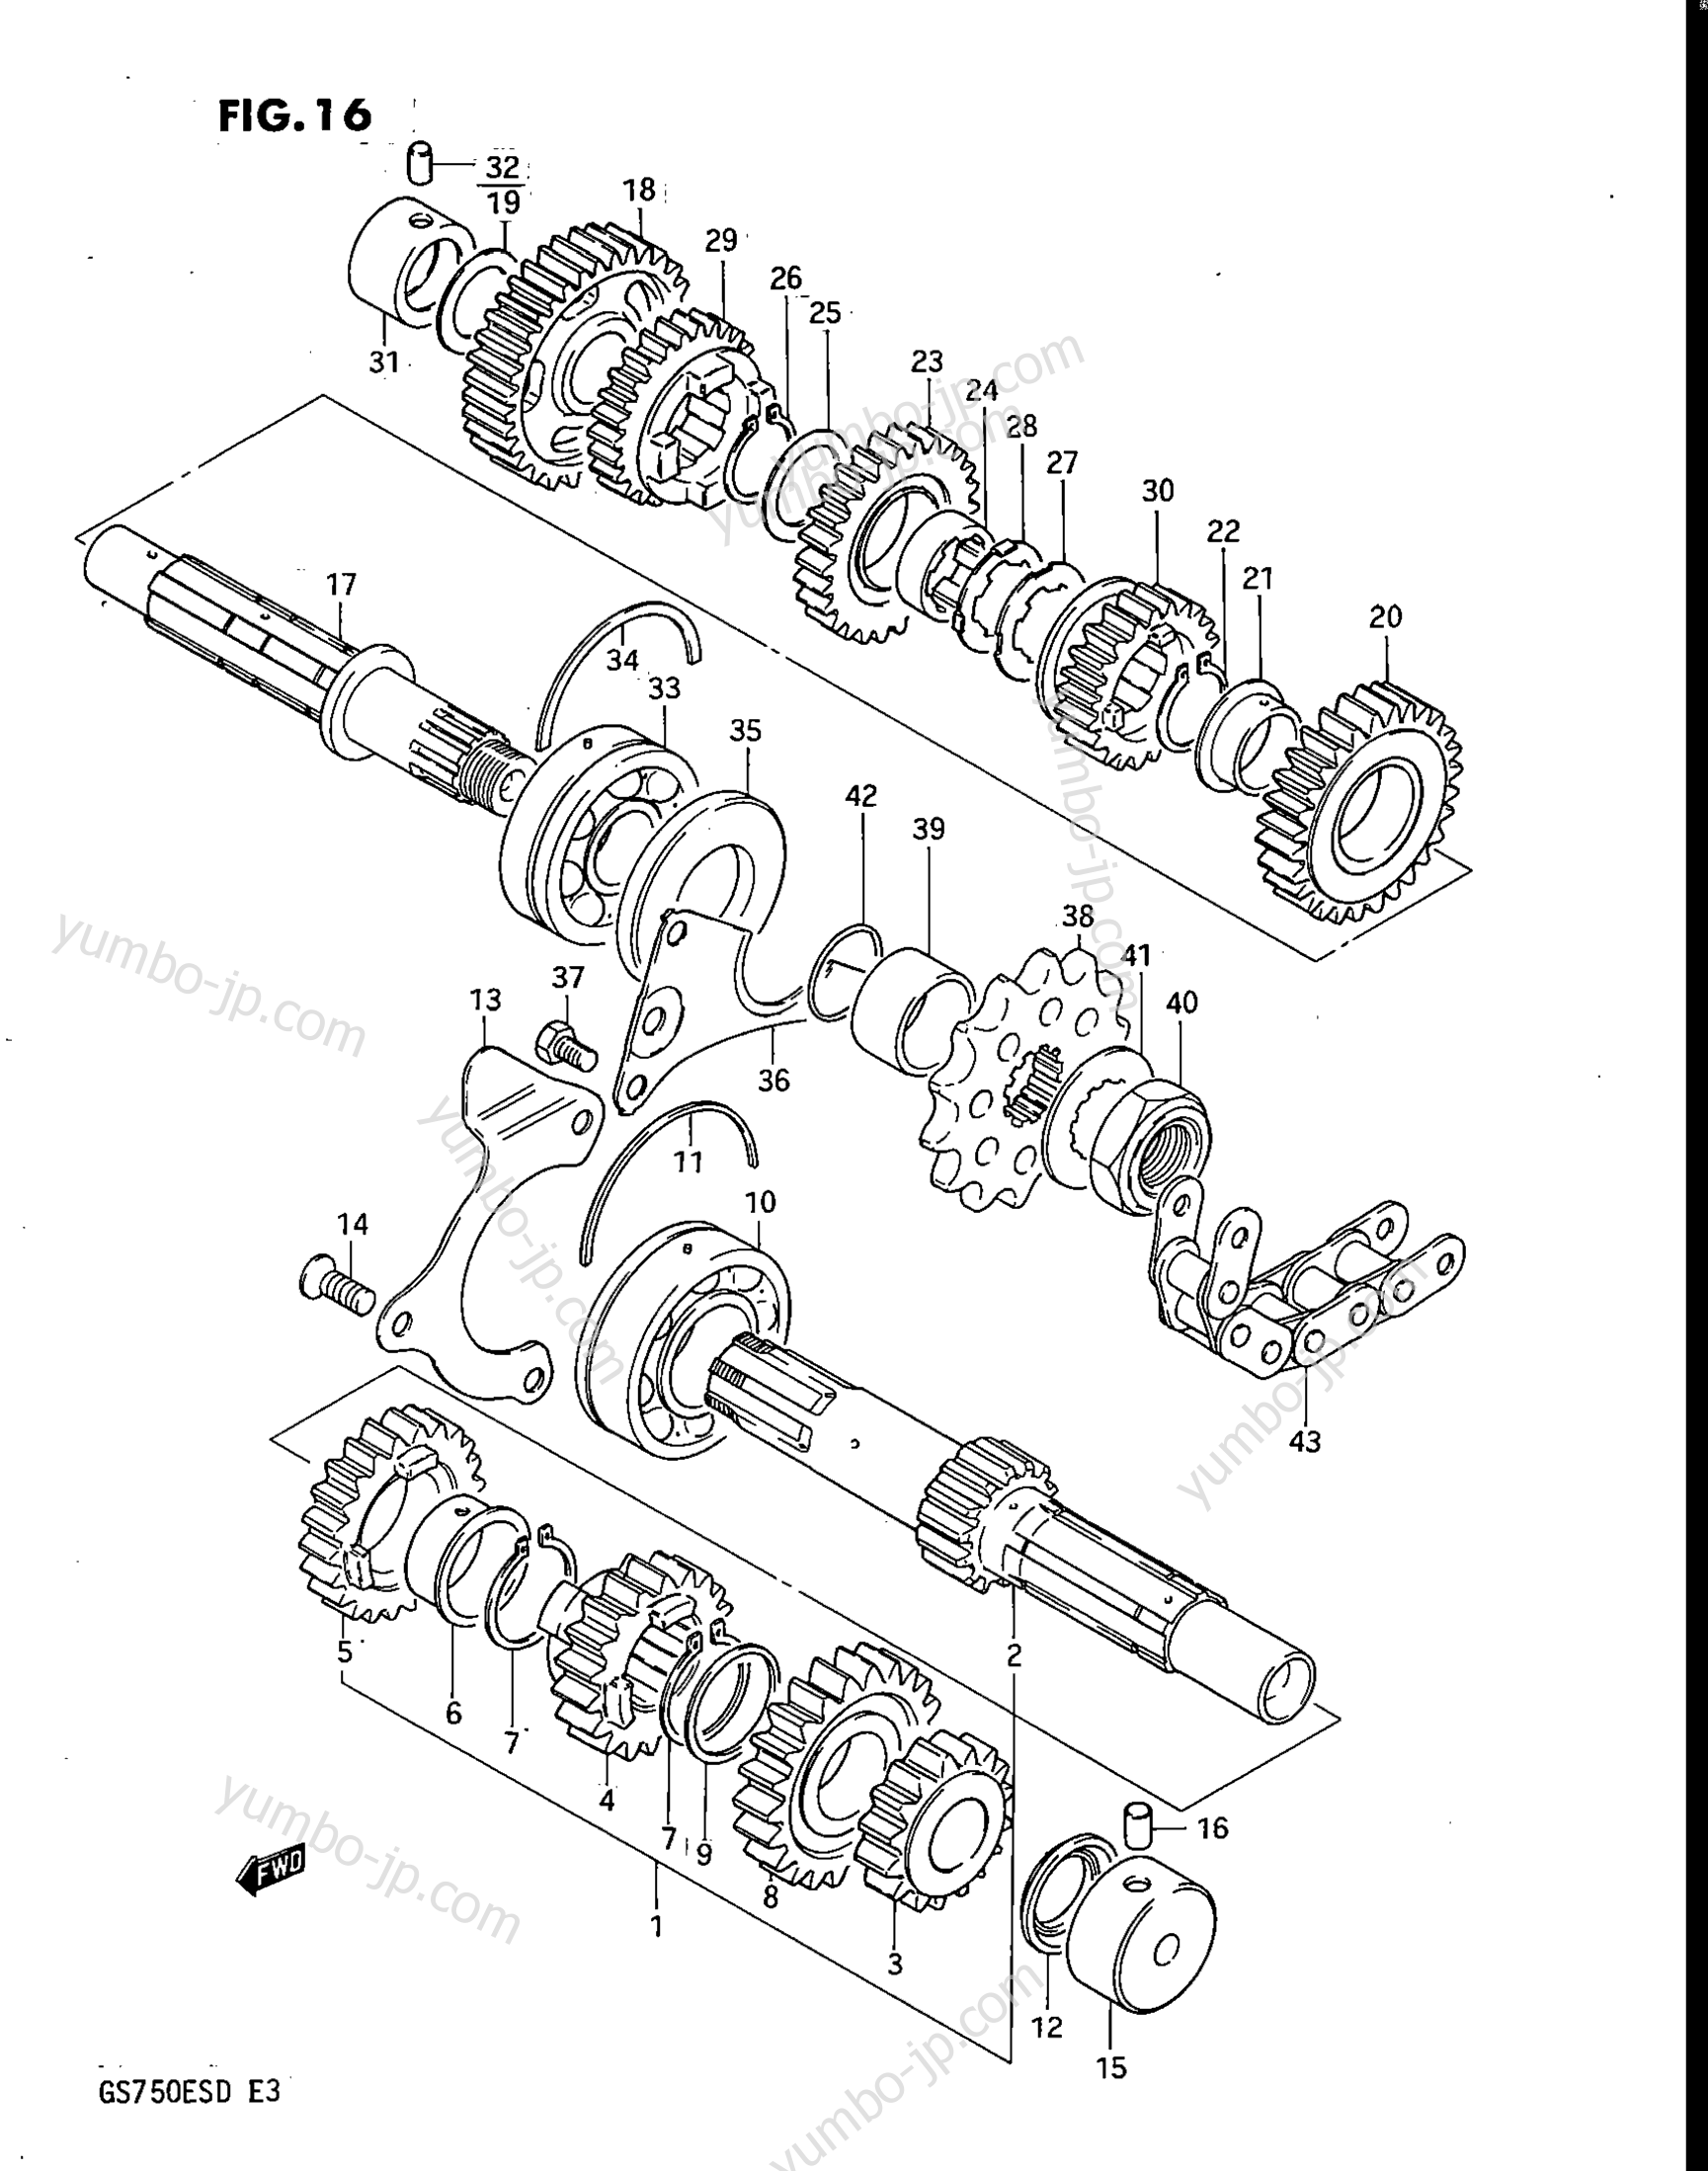 TRANSMISSION for motorcycles SUZUKI GS750E 1983 year